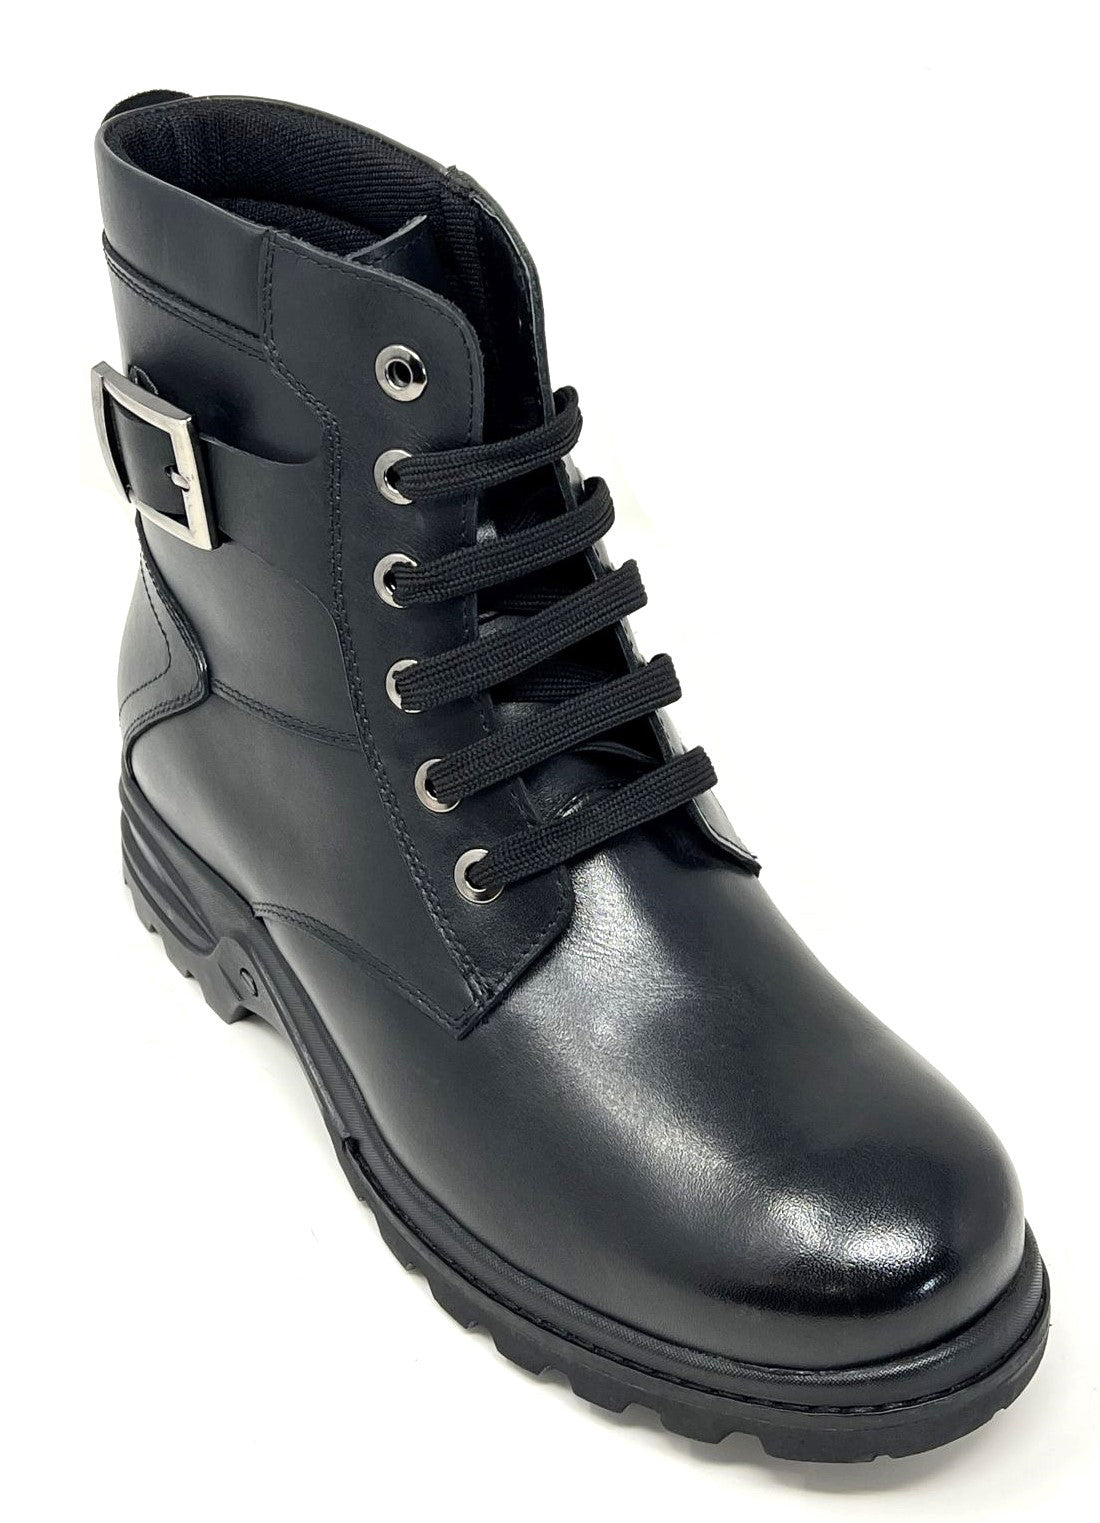 FSY0091 - 3.2 Inches Taller (Black) - Size 9 Only